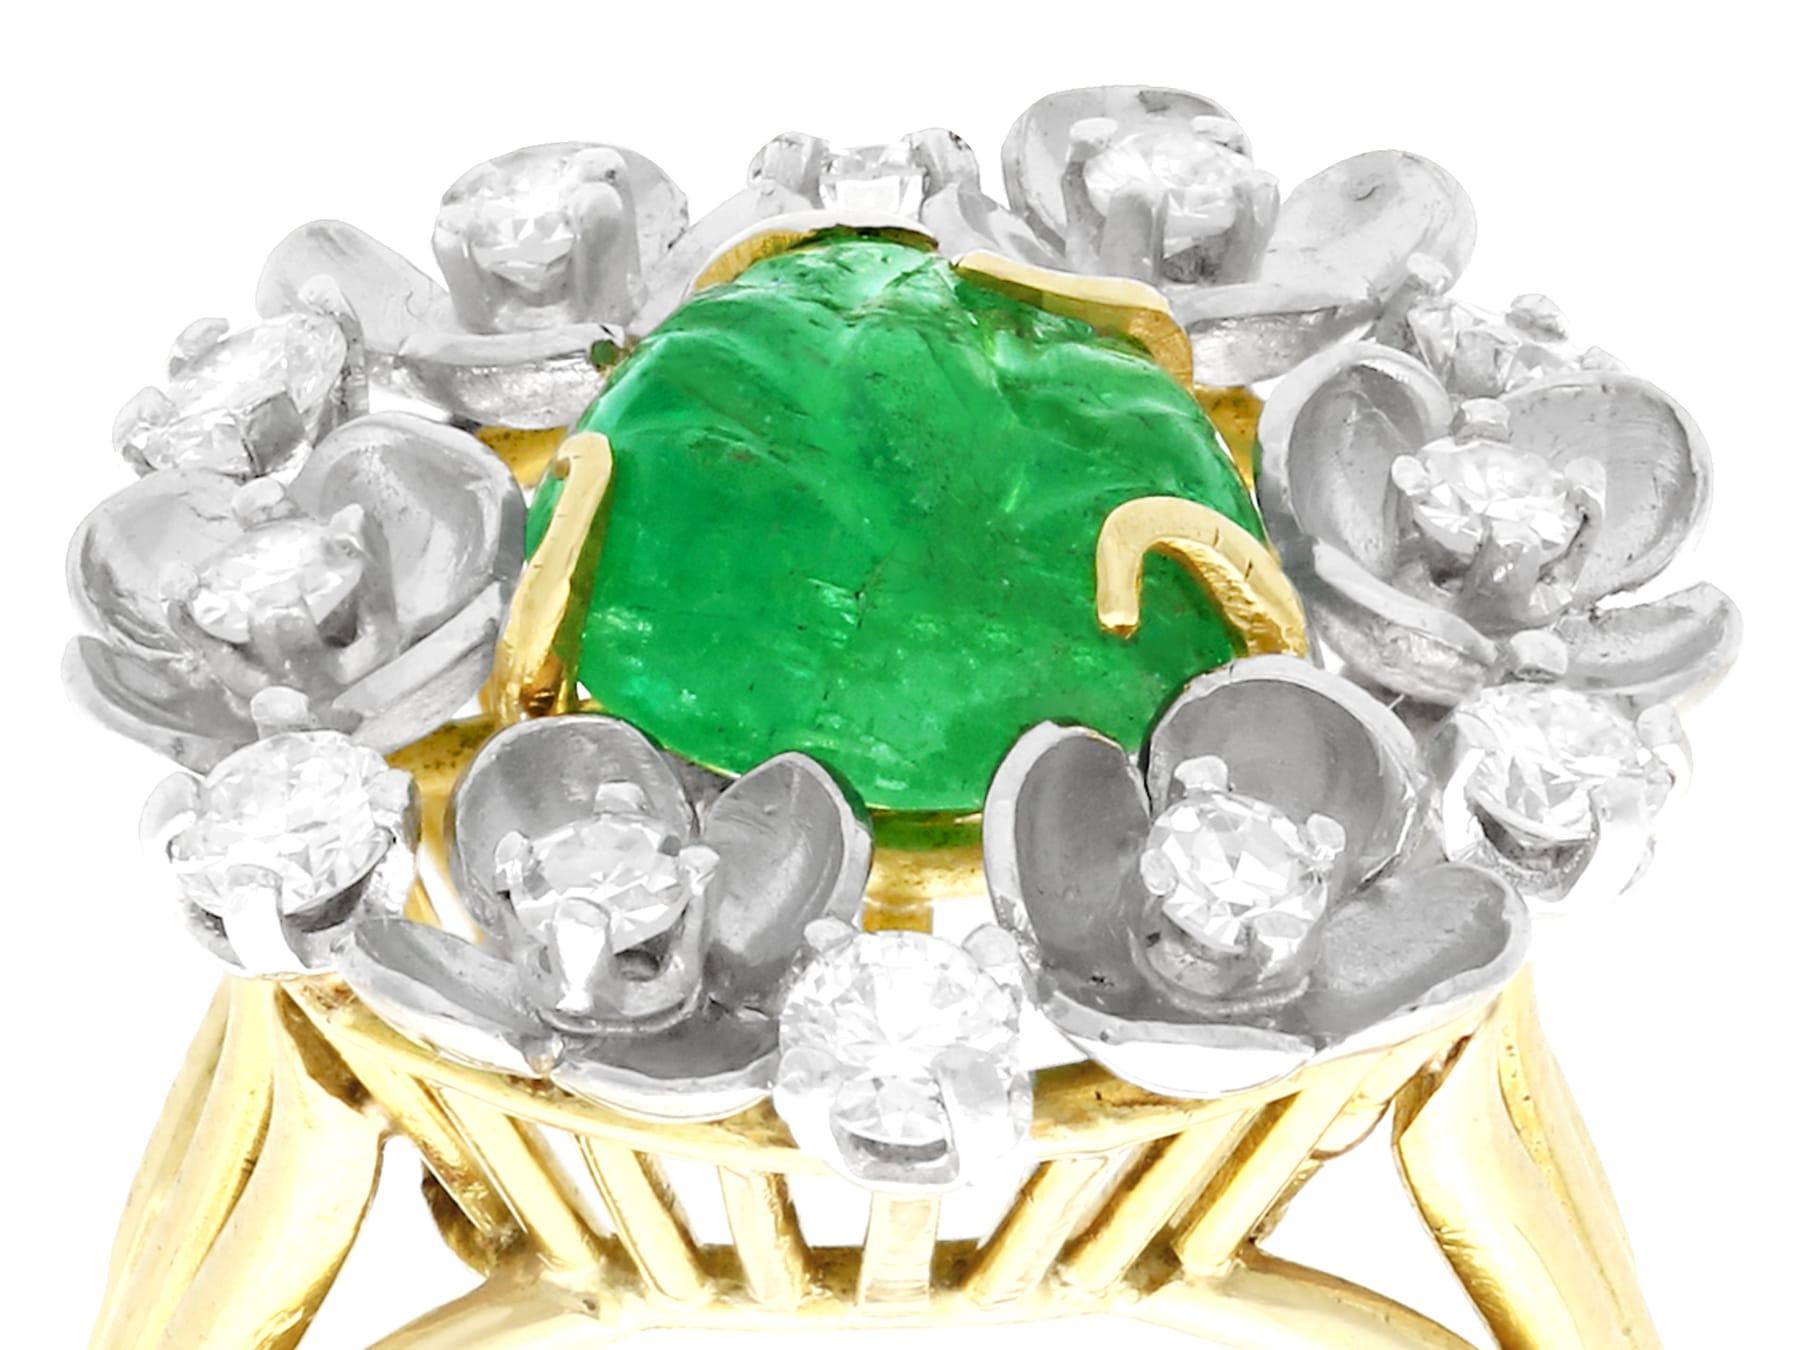 A stunning antique 2.42 carat emerald and 0.95 carat diamond, 18 karat yellow gold and 18 karat white gold set dress ring; part of our diverse antique jewelry collections.

This stunning, fine an impressive antique 1920s emerald ring has been